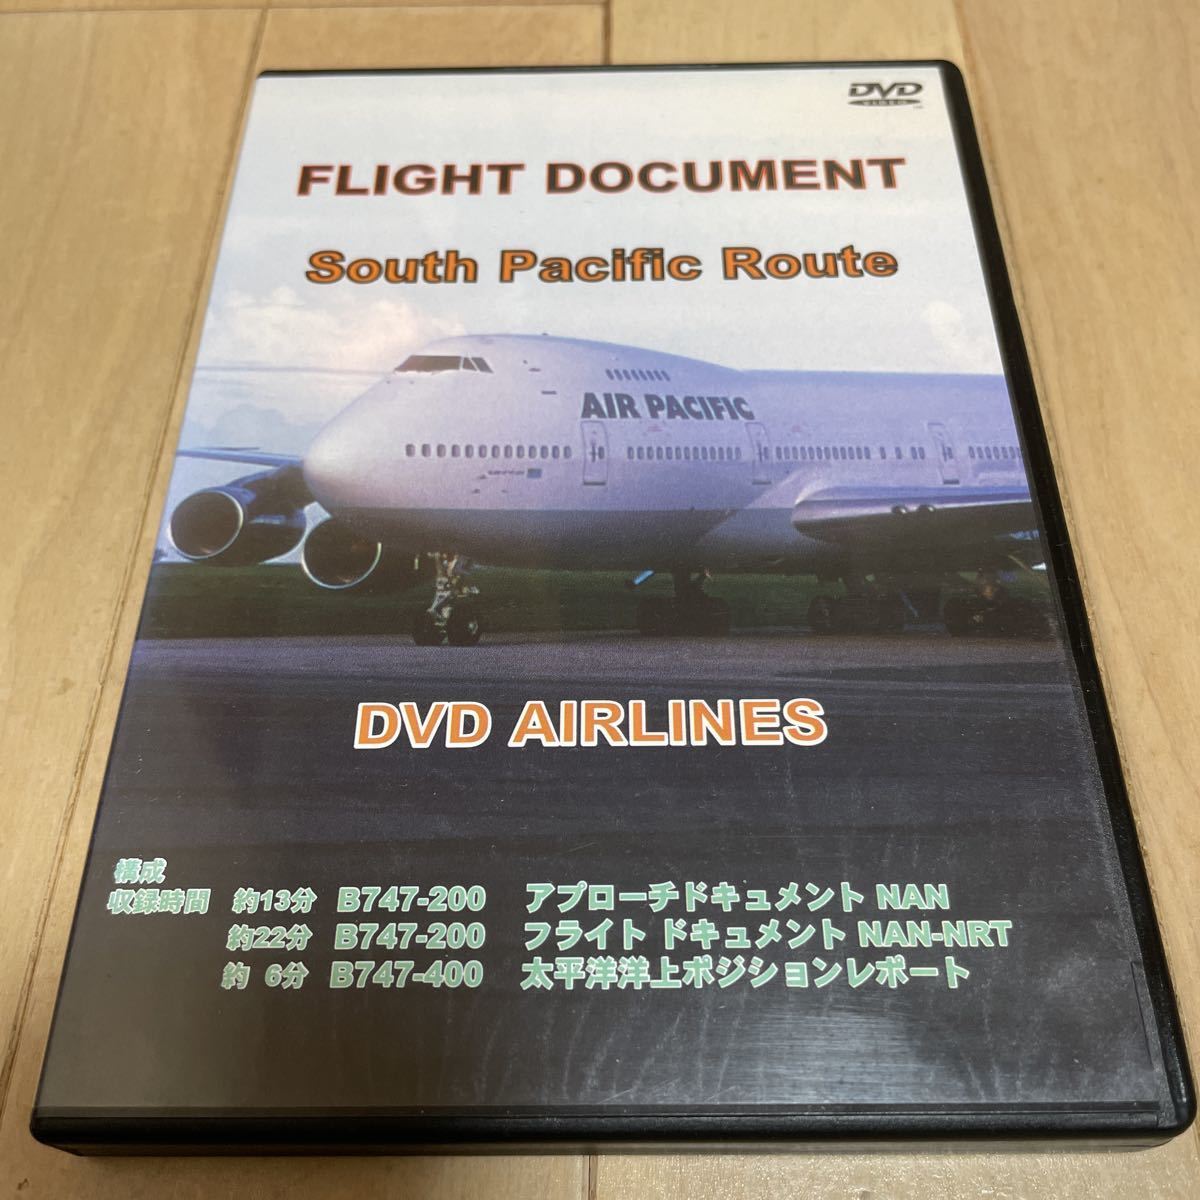 DVD[ world. air liner flight document SOUTH PACIFIC ROUTE